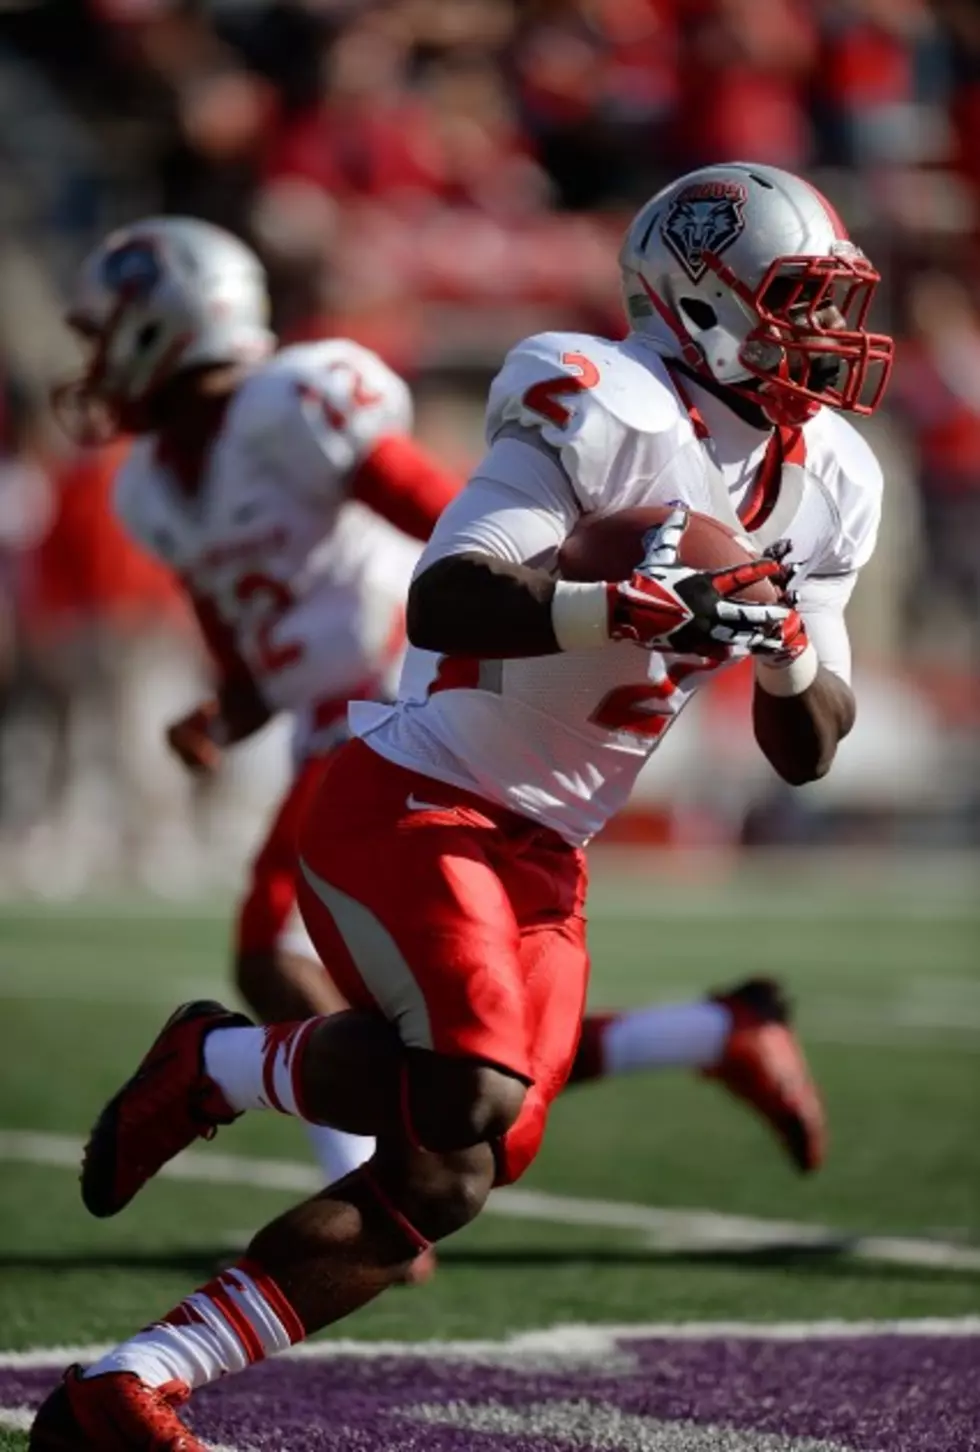 UNM Player Reinstated After Rape Charges Dropped